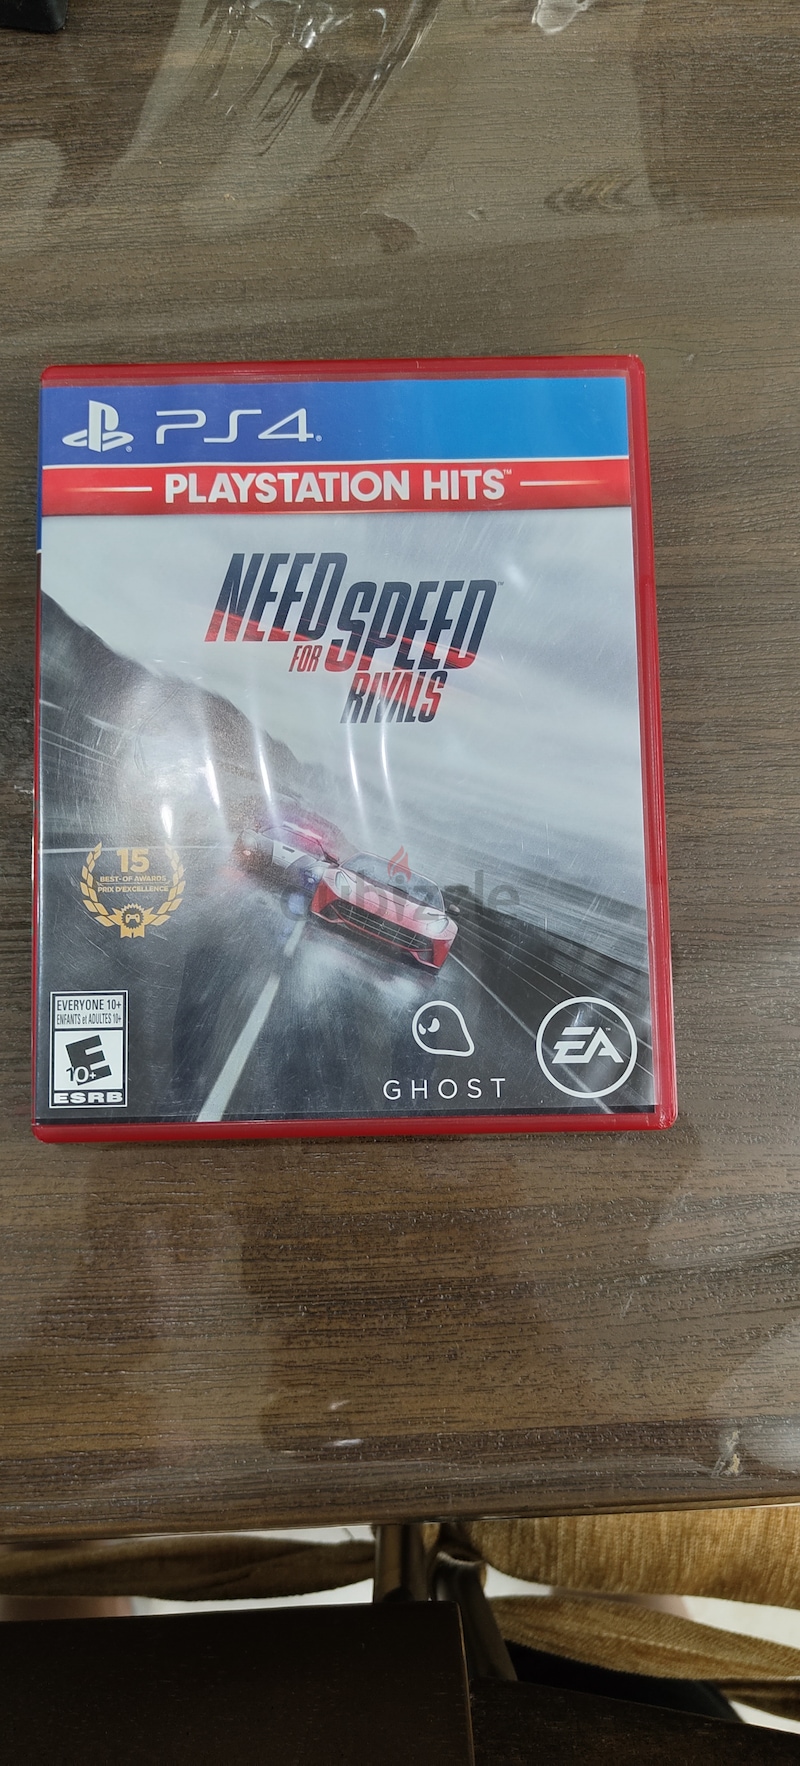 Need for Speed Rivals – PS4